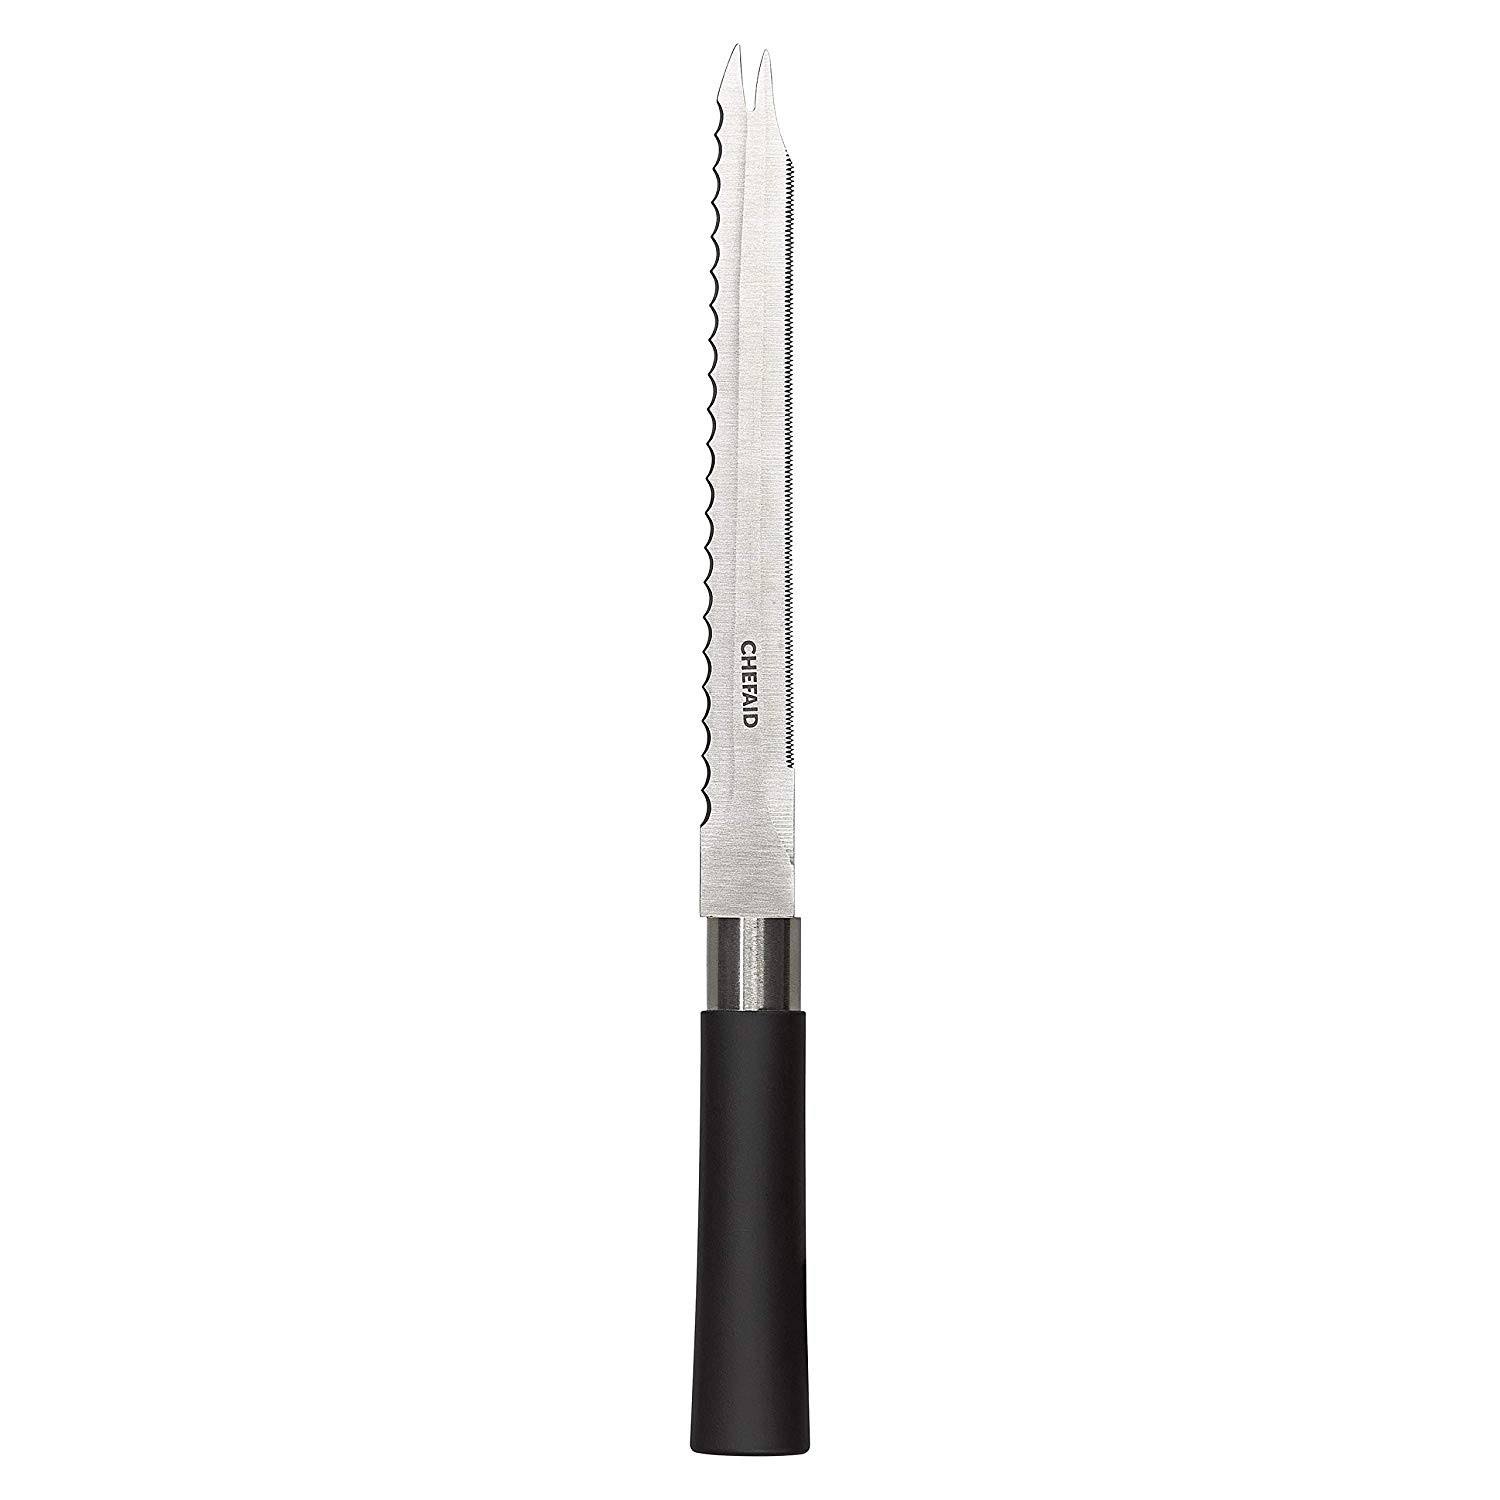 Chef Aid Double Serrated Carving Knife with Soft Grip | Tableware | Delivery Guaranteed | Best Price Guarantee | 30 Day Money Back Guarantee